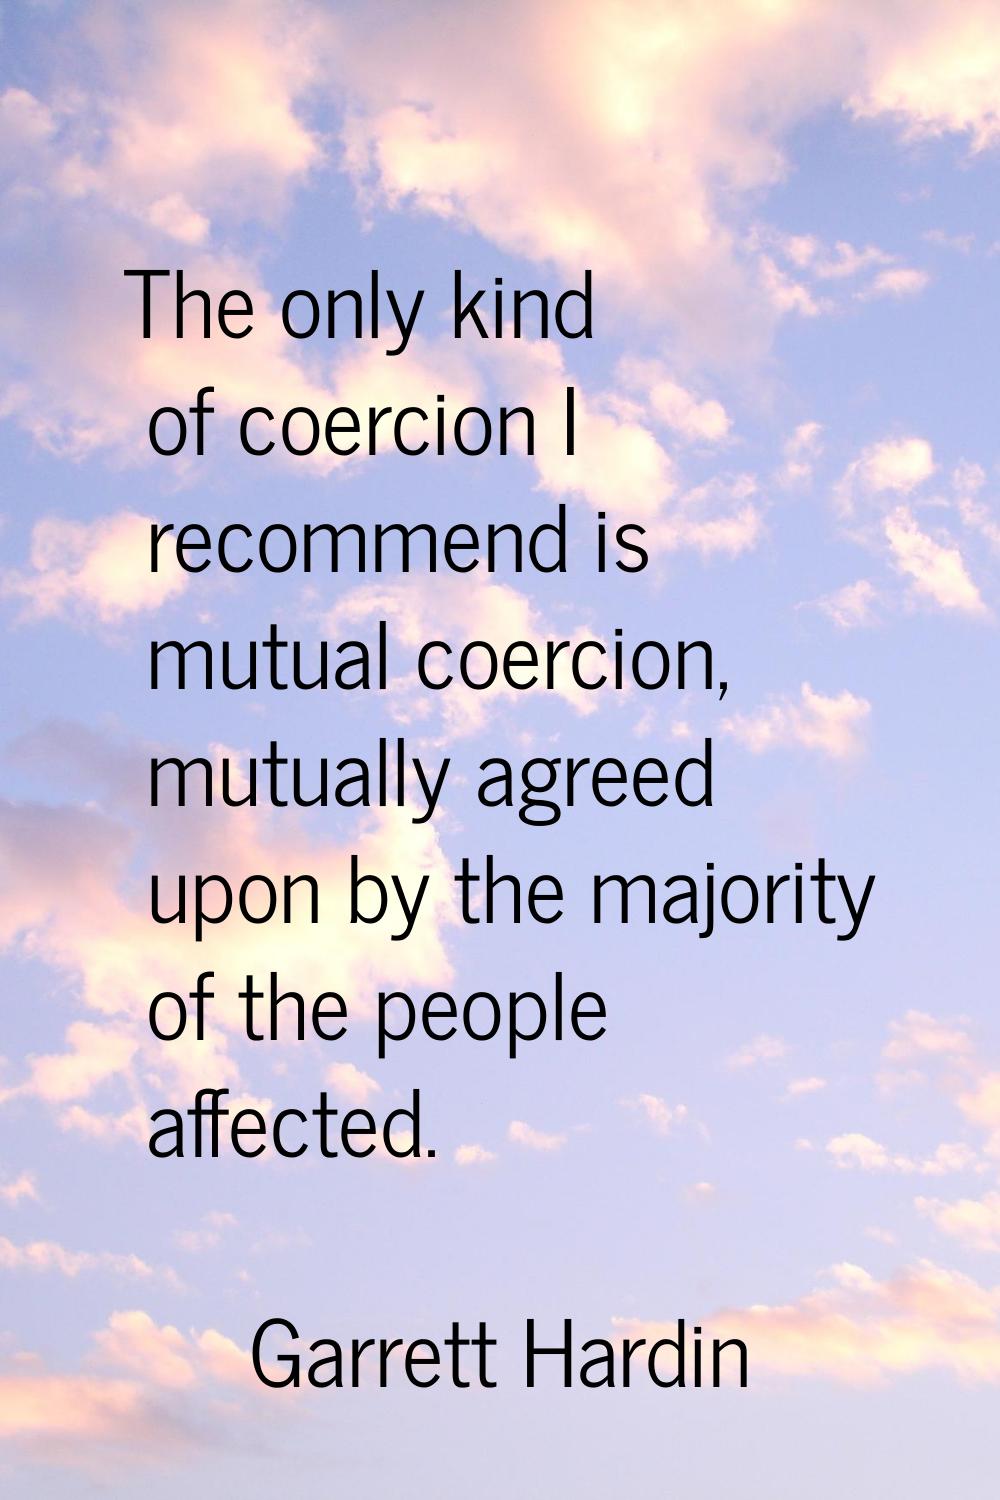 The only kind of coercion I recommend is mutual coercion, mutually agreed upon by the majority of t